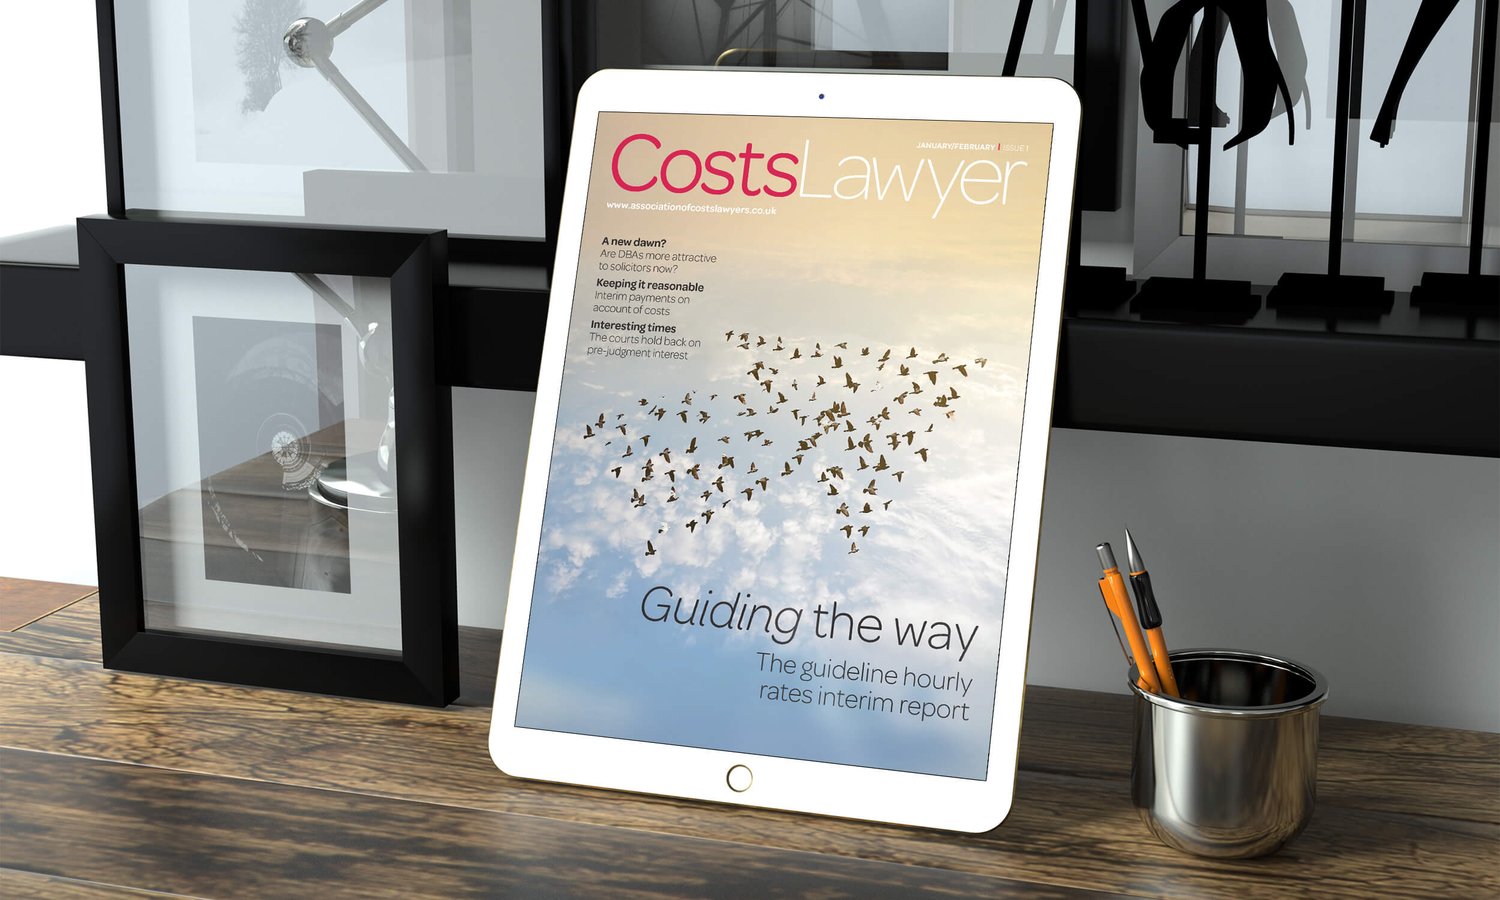 A tablet leaning upright on a desk displaying the cover of Costs Lawyer magazine